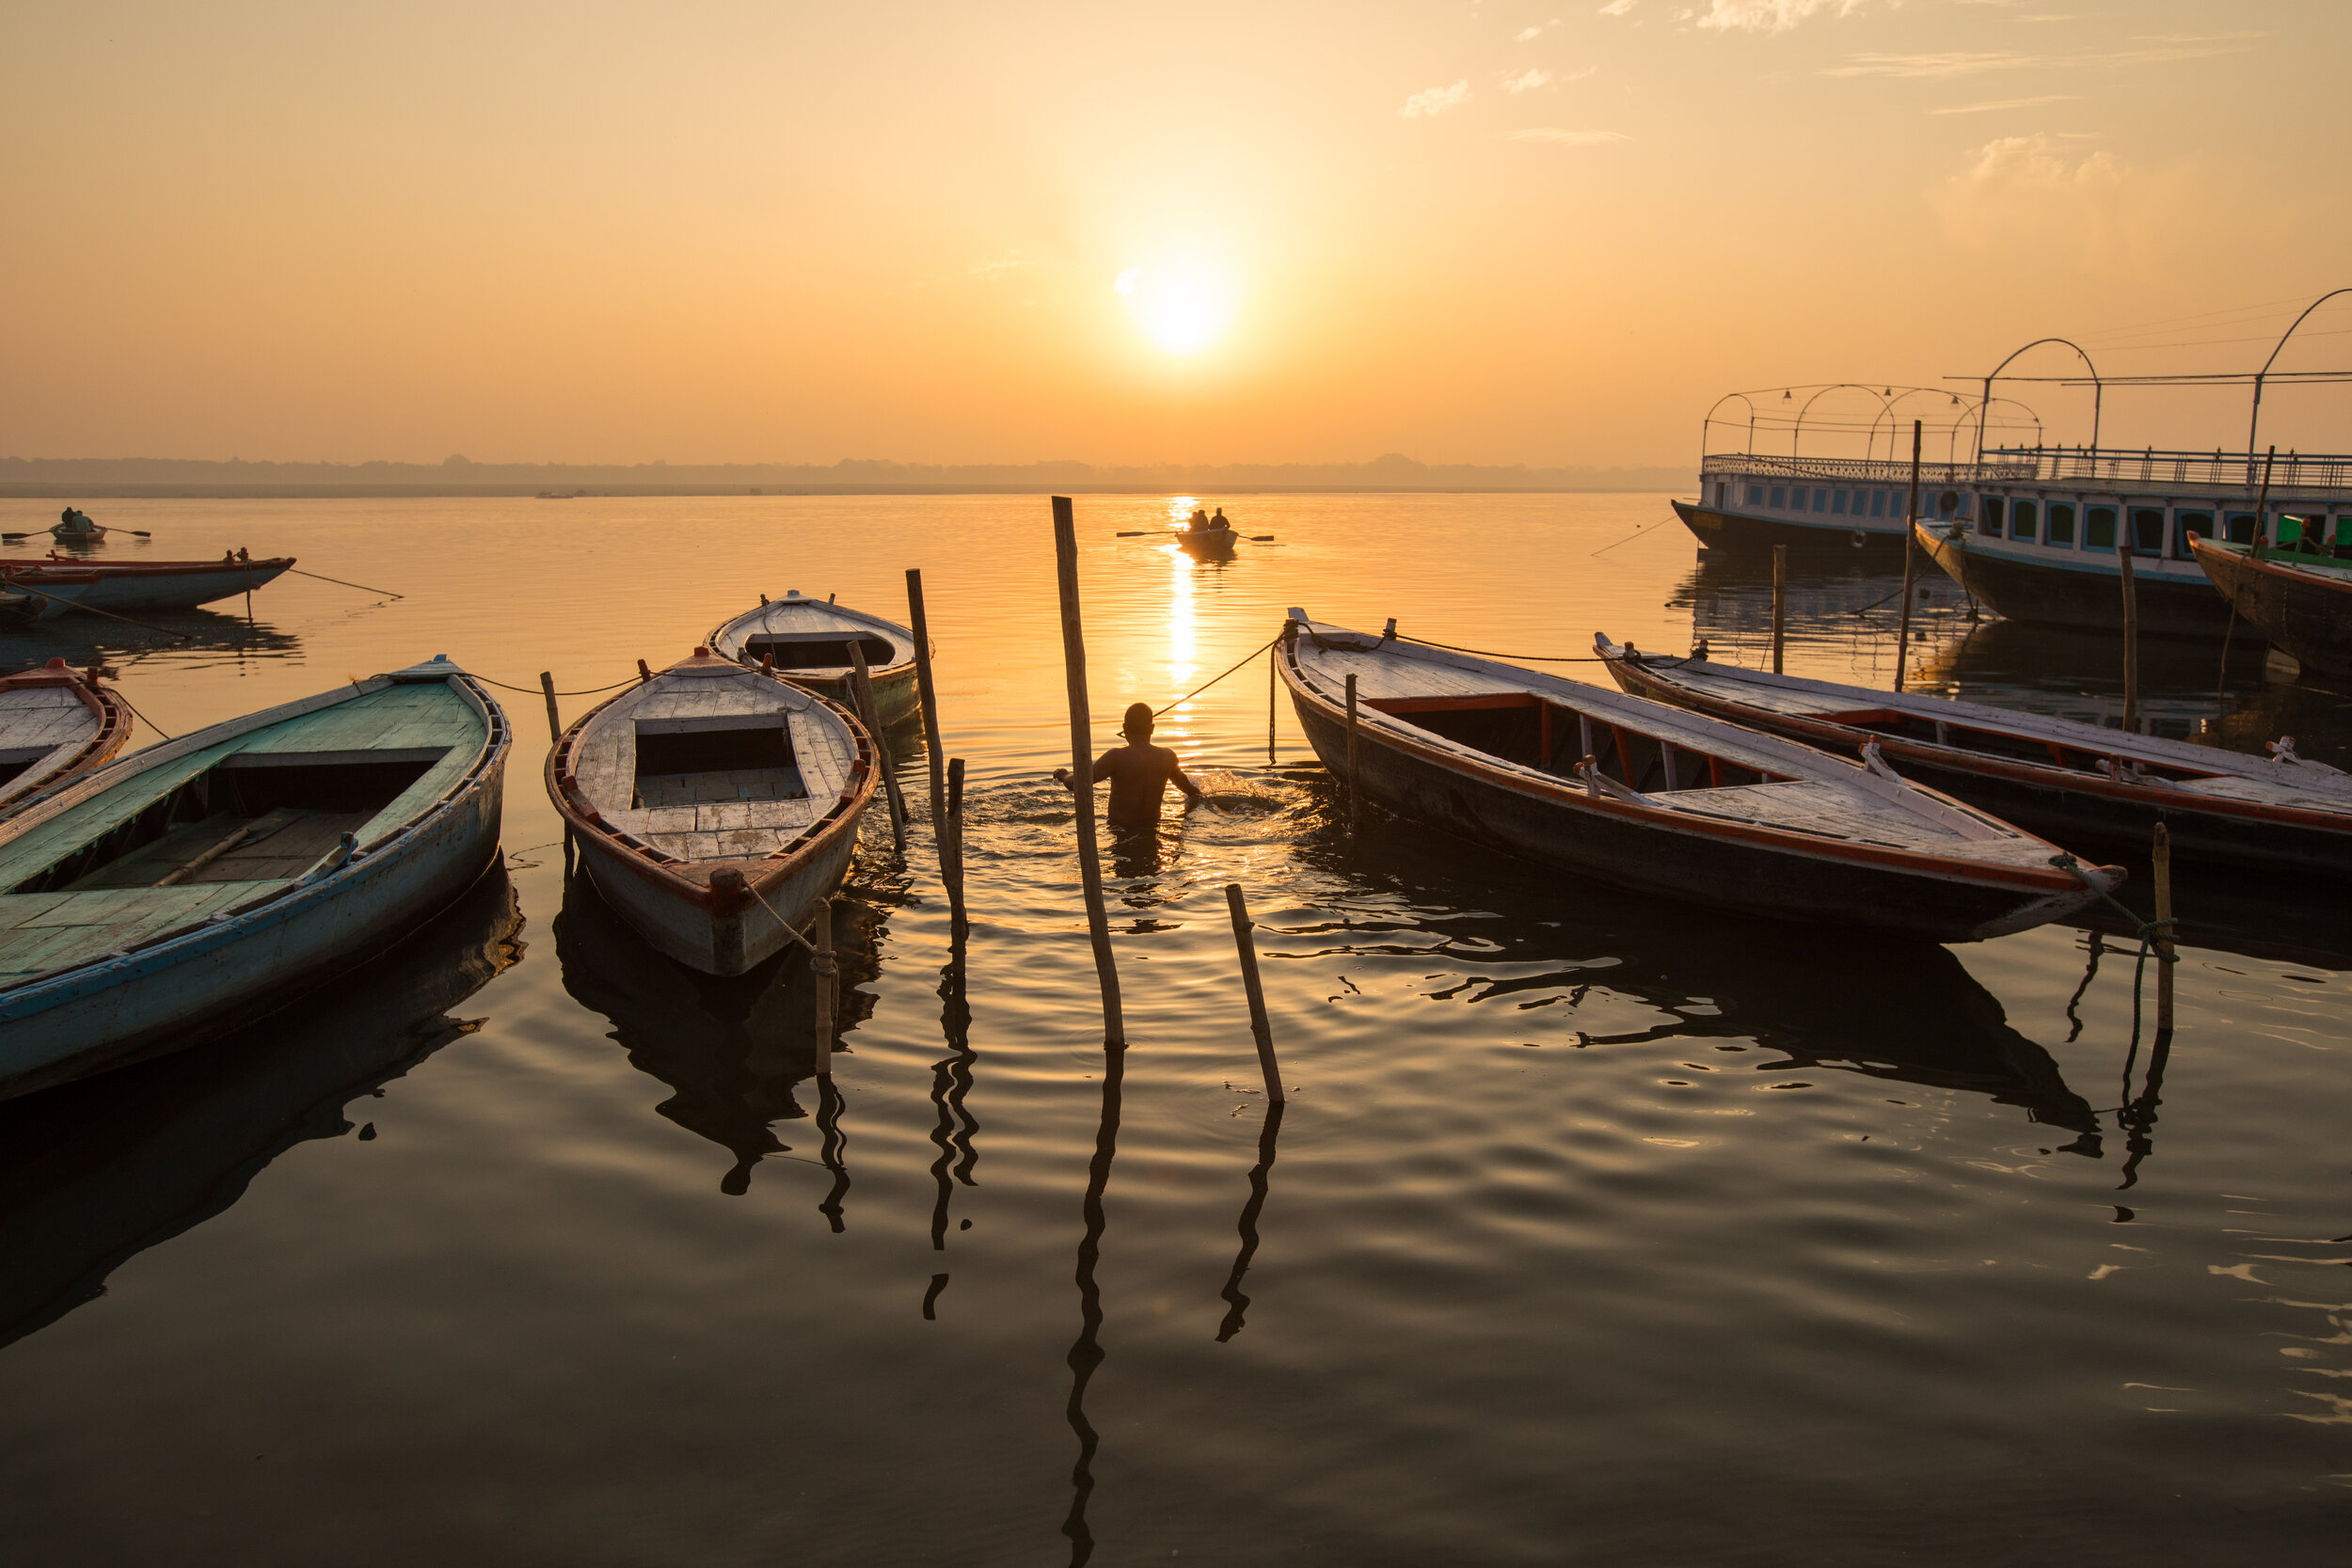 Sunrise over the iconic River Ganges in Varsnasi, India.